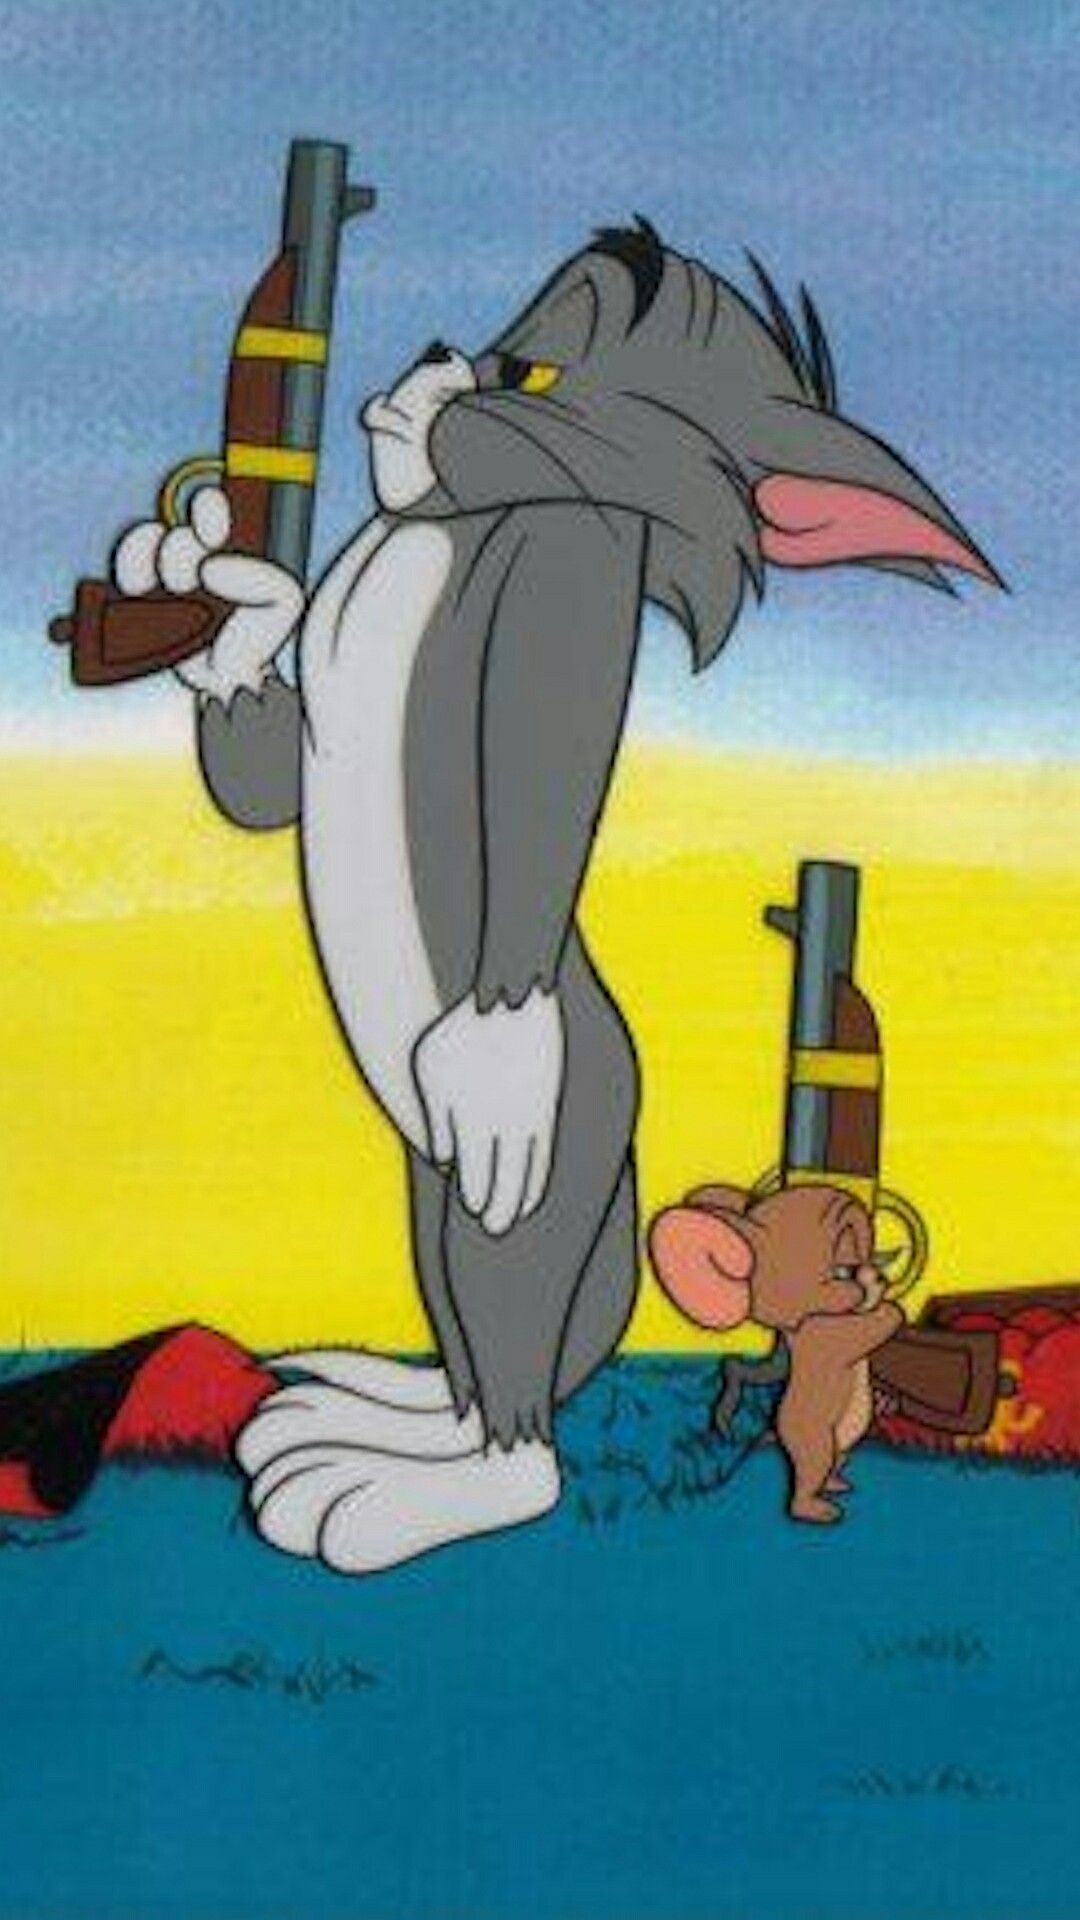 More good stuff, do you remember? Tom & Jerry, Saturday Morning